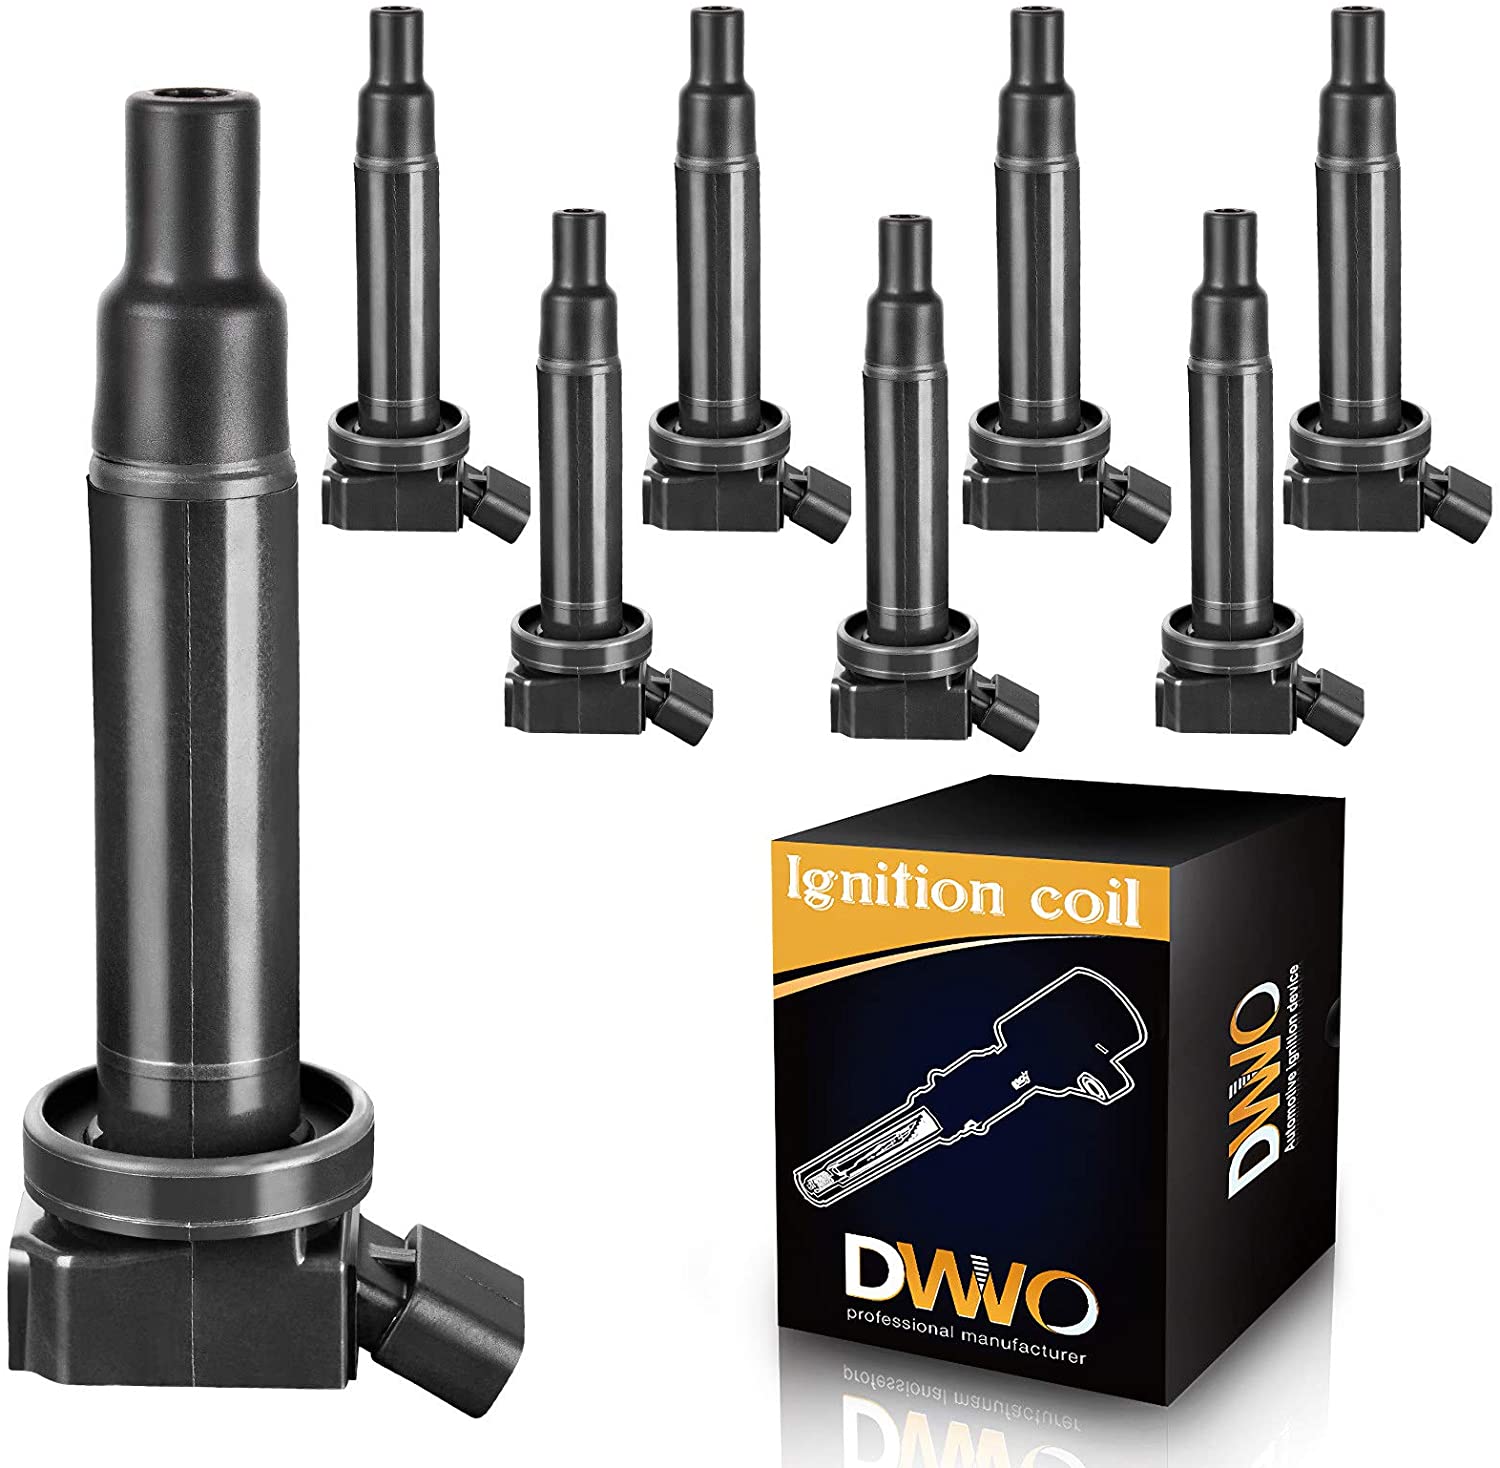 DWVO Ignition Coil Pack Compatible for Toyota 4Runner Tundra SequoiaLand Cruiser, Lexus GS430 SC430 LS430 GX470 LX470 LX570-4.3L 4.7L V8 - Set of 8